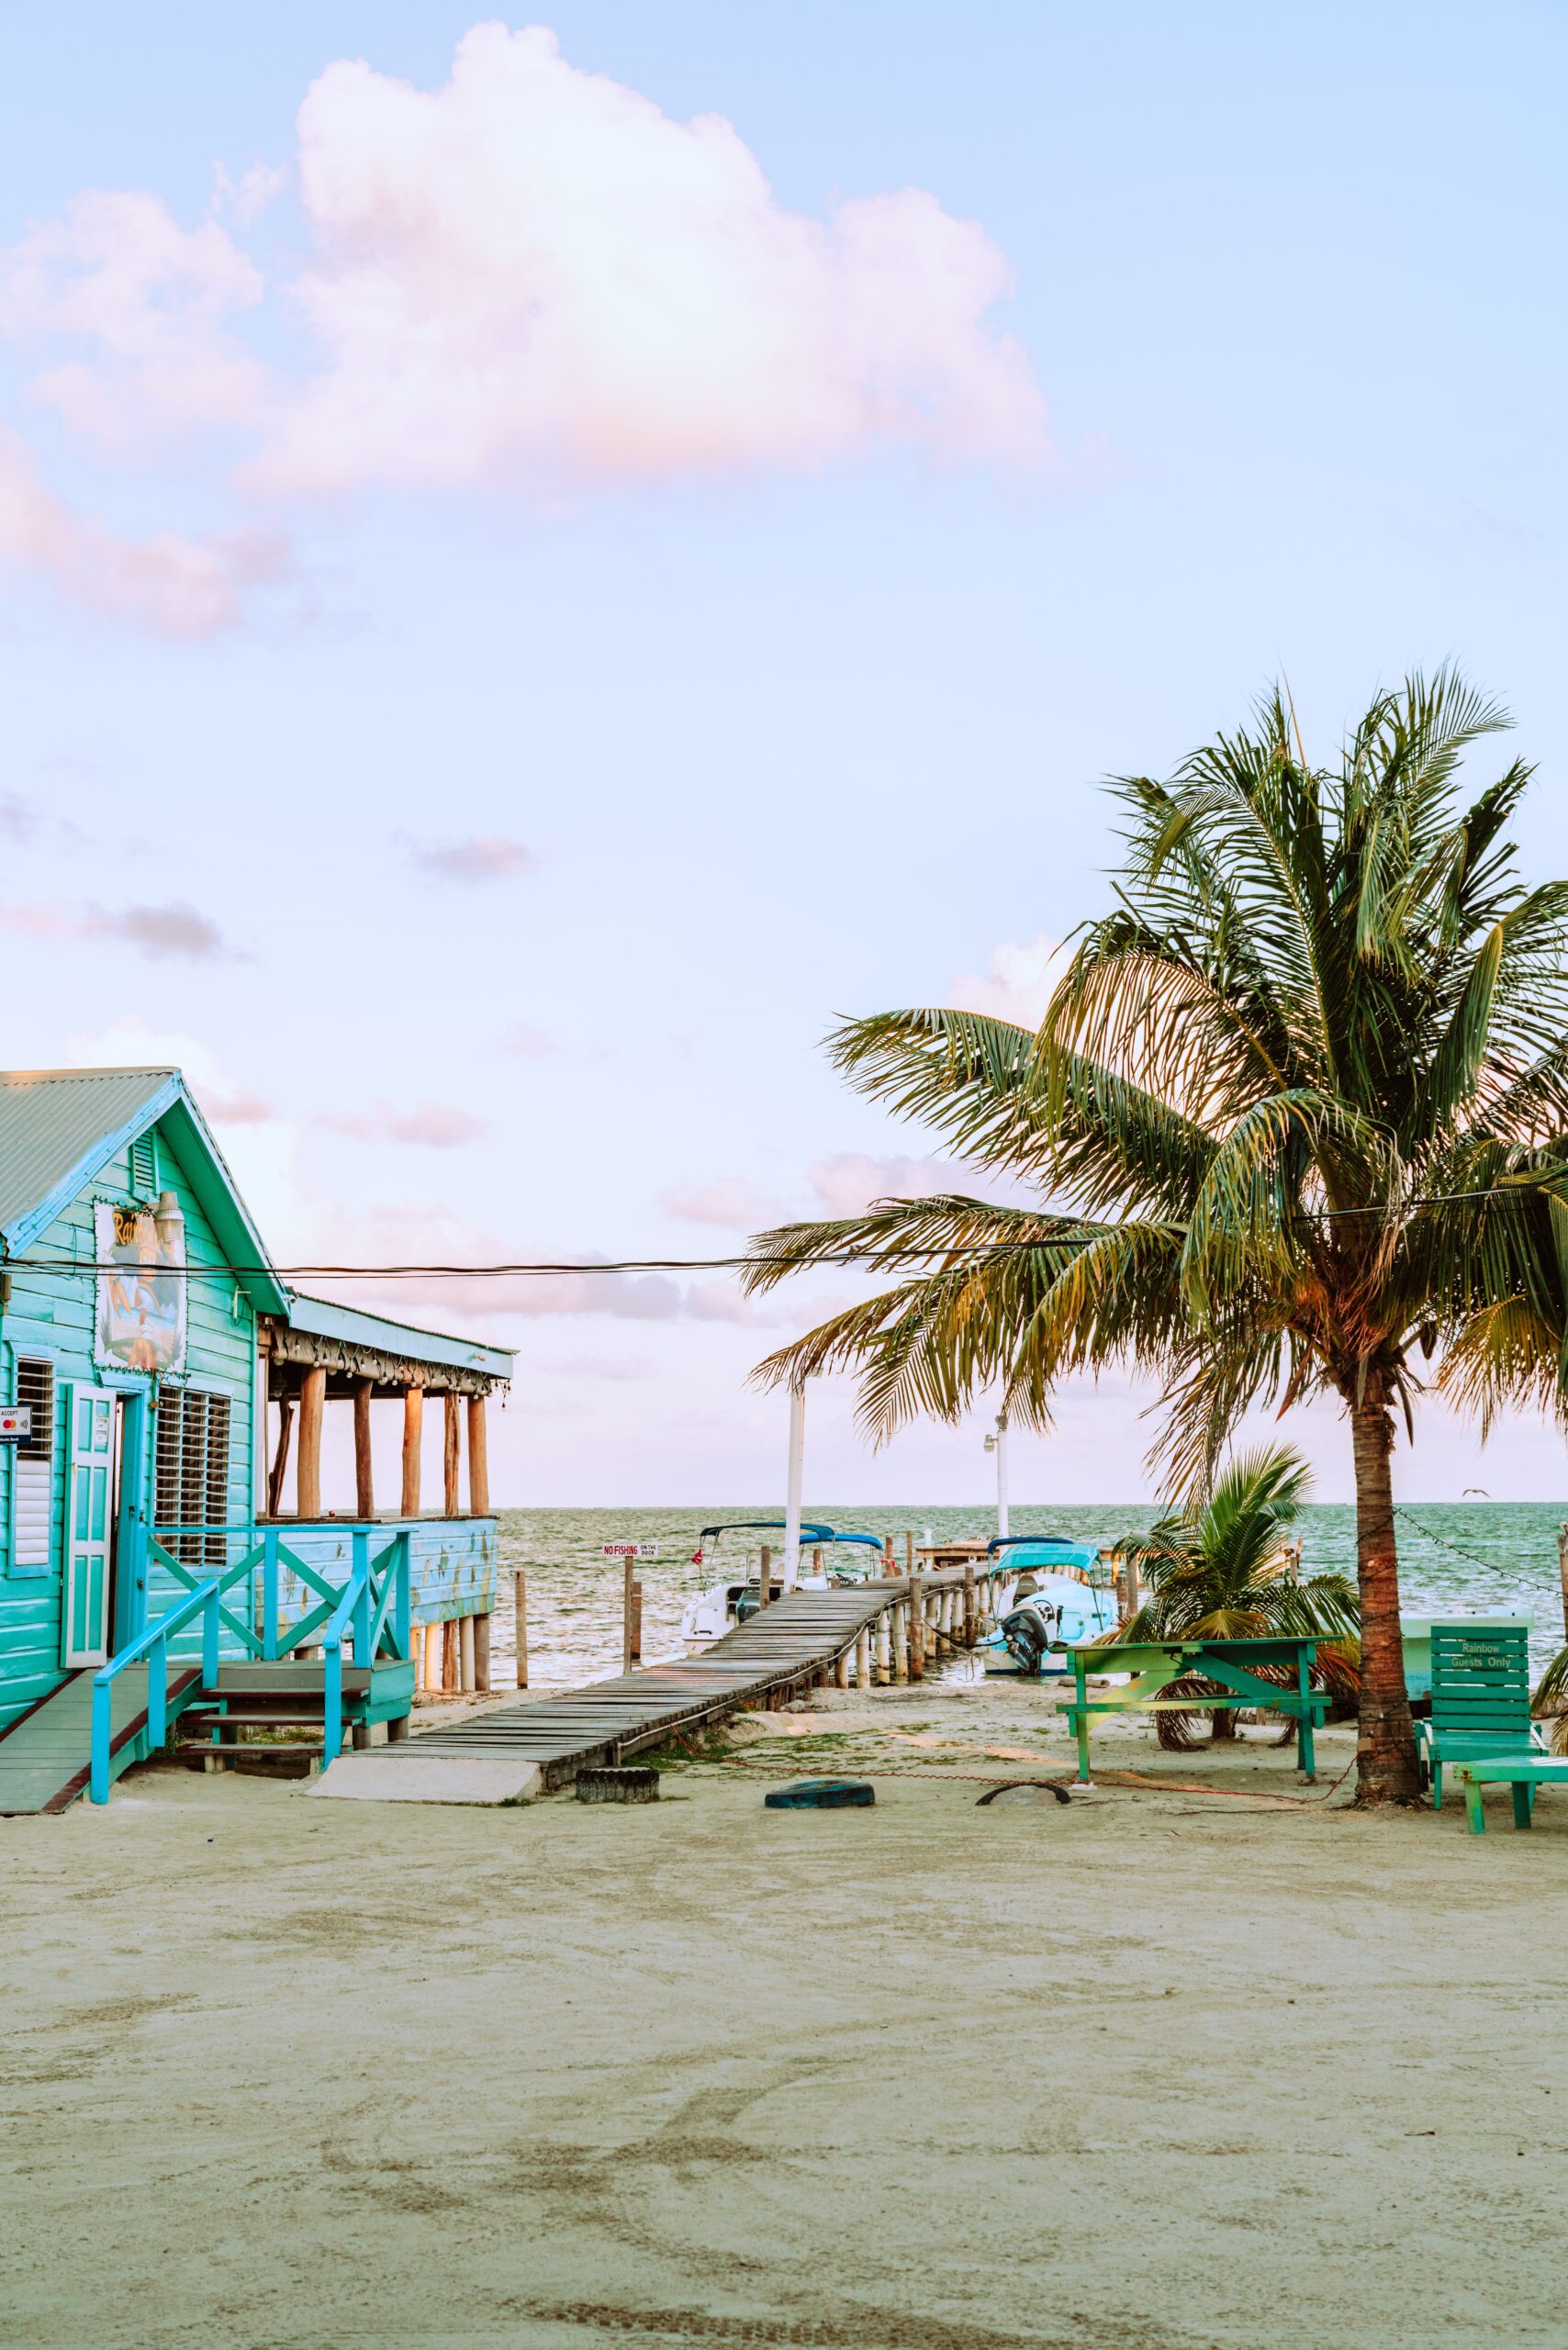 Read more about the article A Tranquil Retreat: Caye Caulker and its Charm